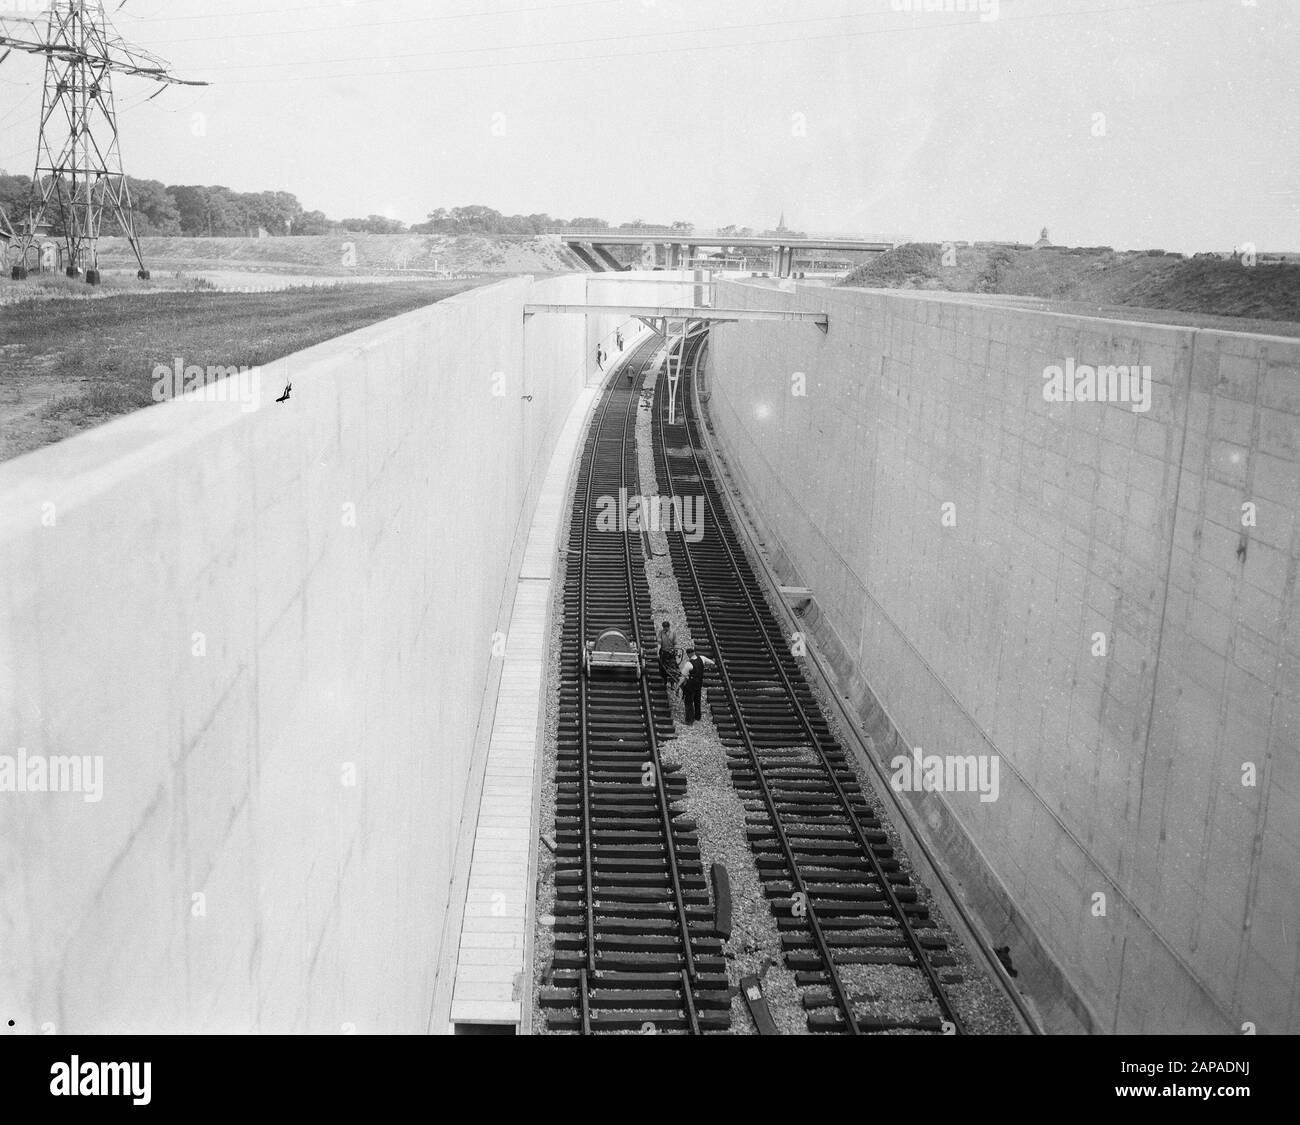 Construction Velser tunnel, electrical lines near the railway tunnel Date: July 3, 1957 Keywords: tunnels Setting name: Velsertunnel Stock Photo